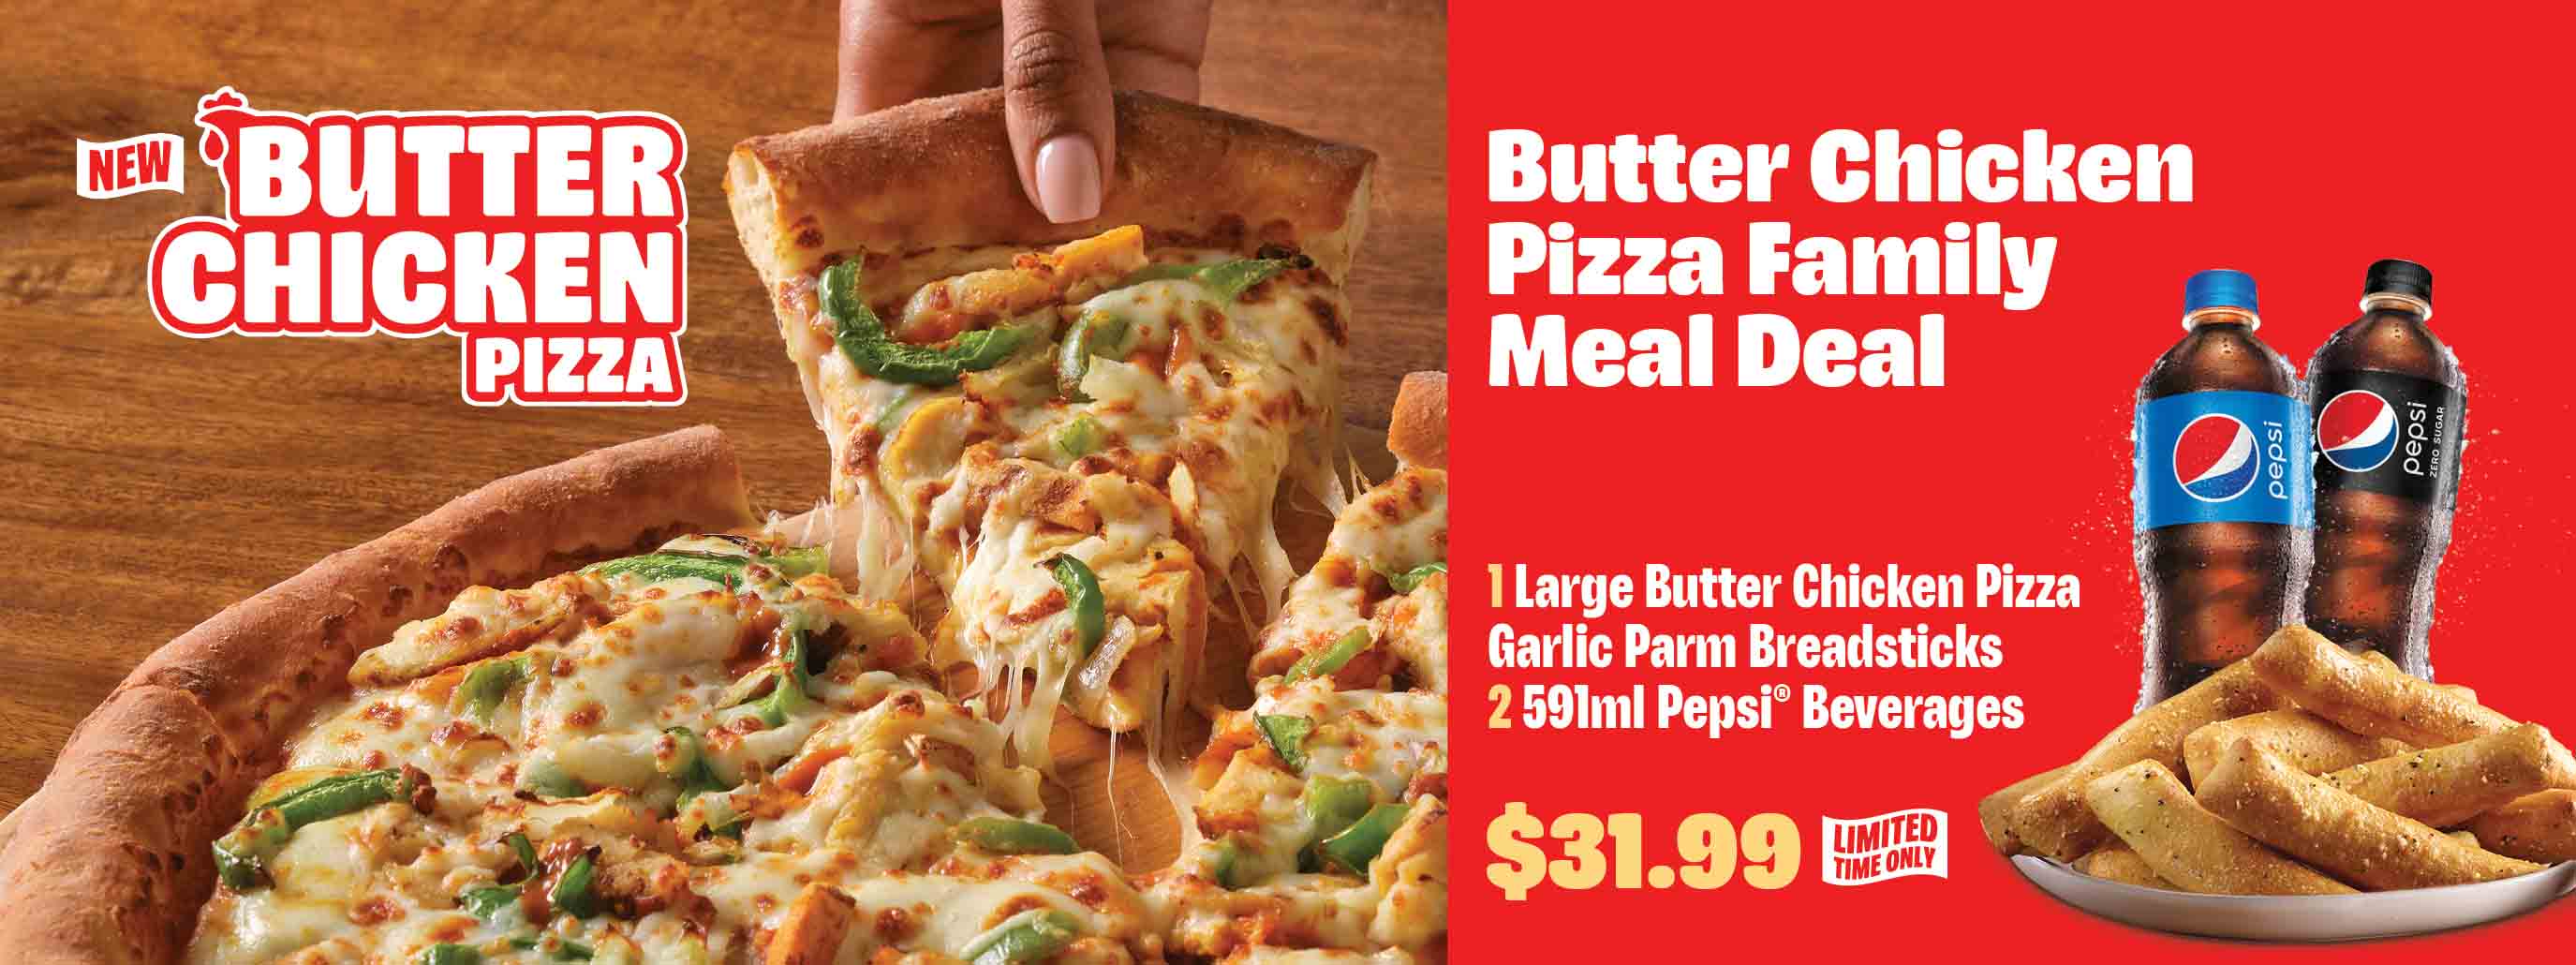 Butter Chicken Pizza Family Meal Deal, $31.99, Limited Time Only